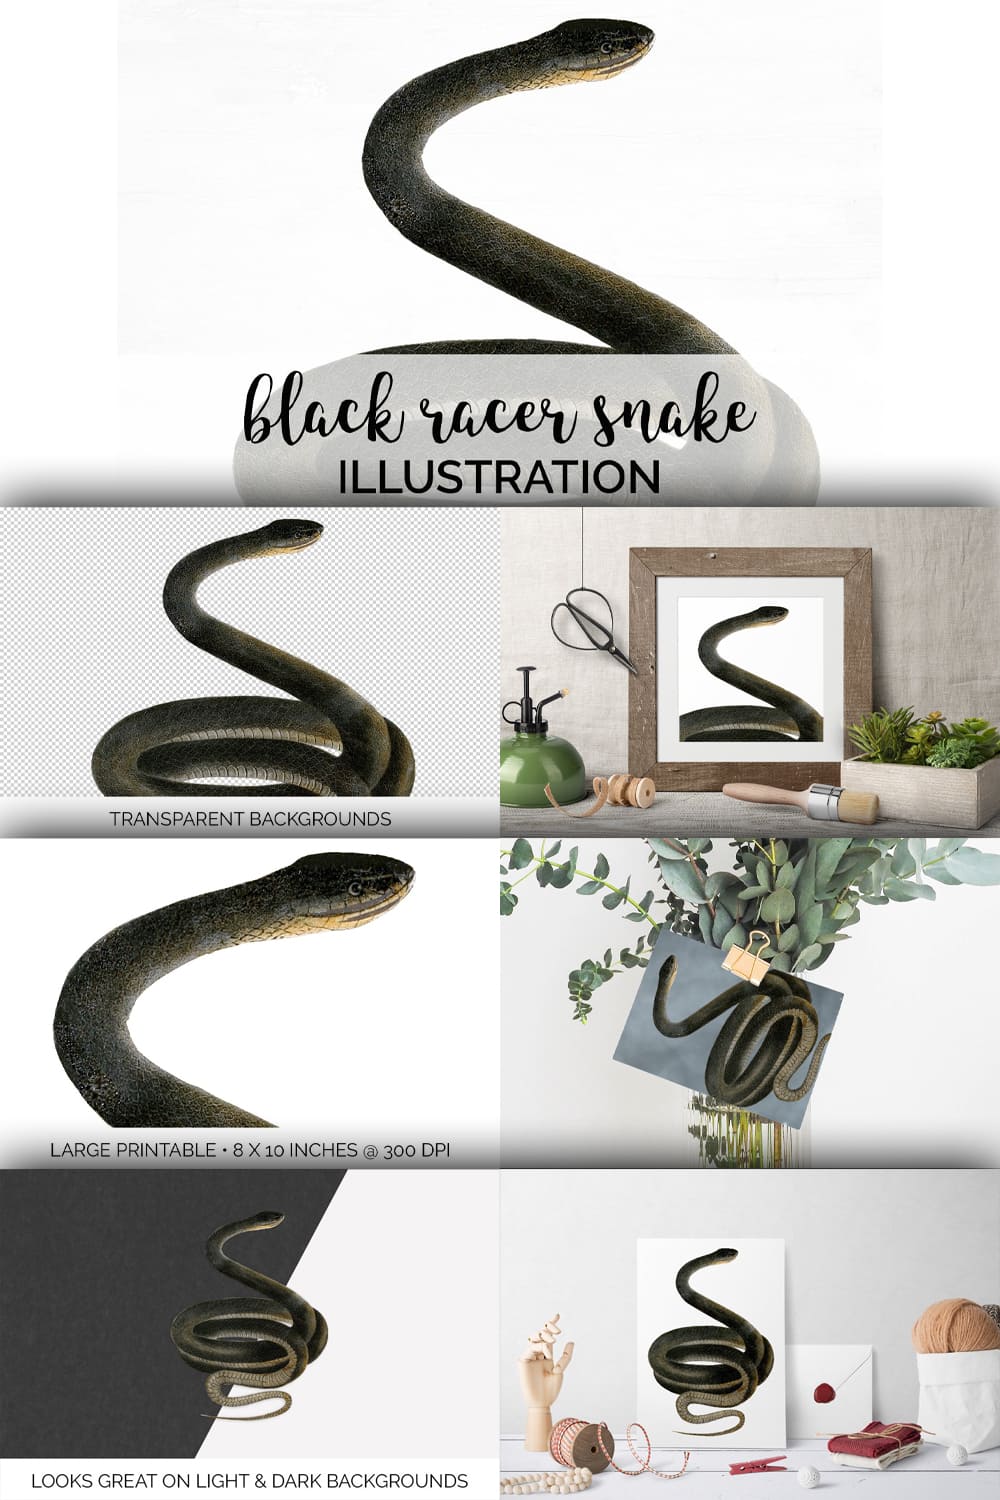 Collection of colorful images black racer snake.